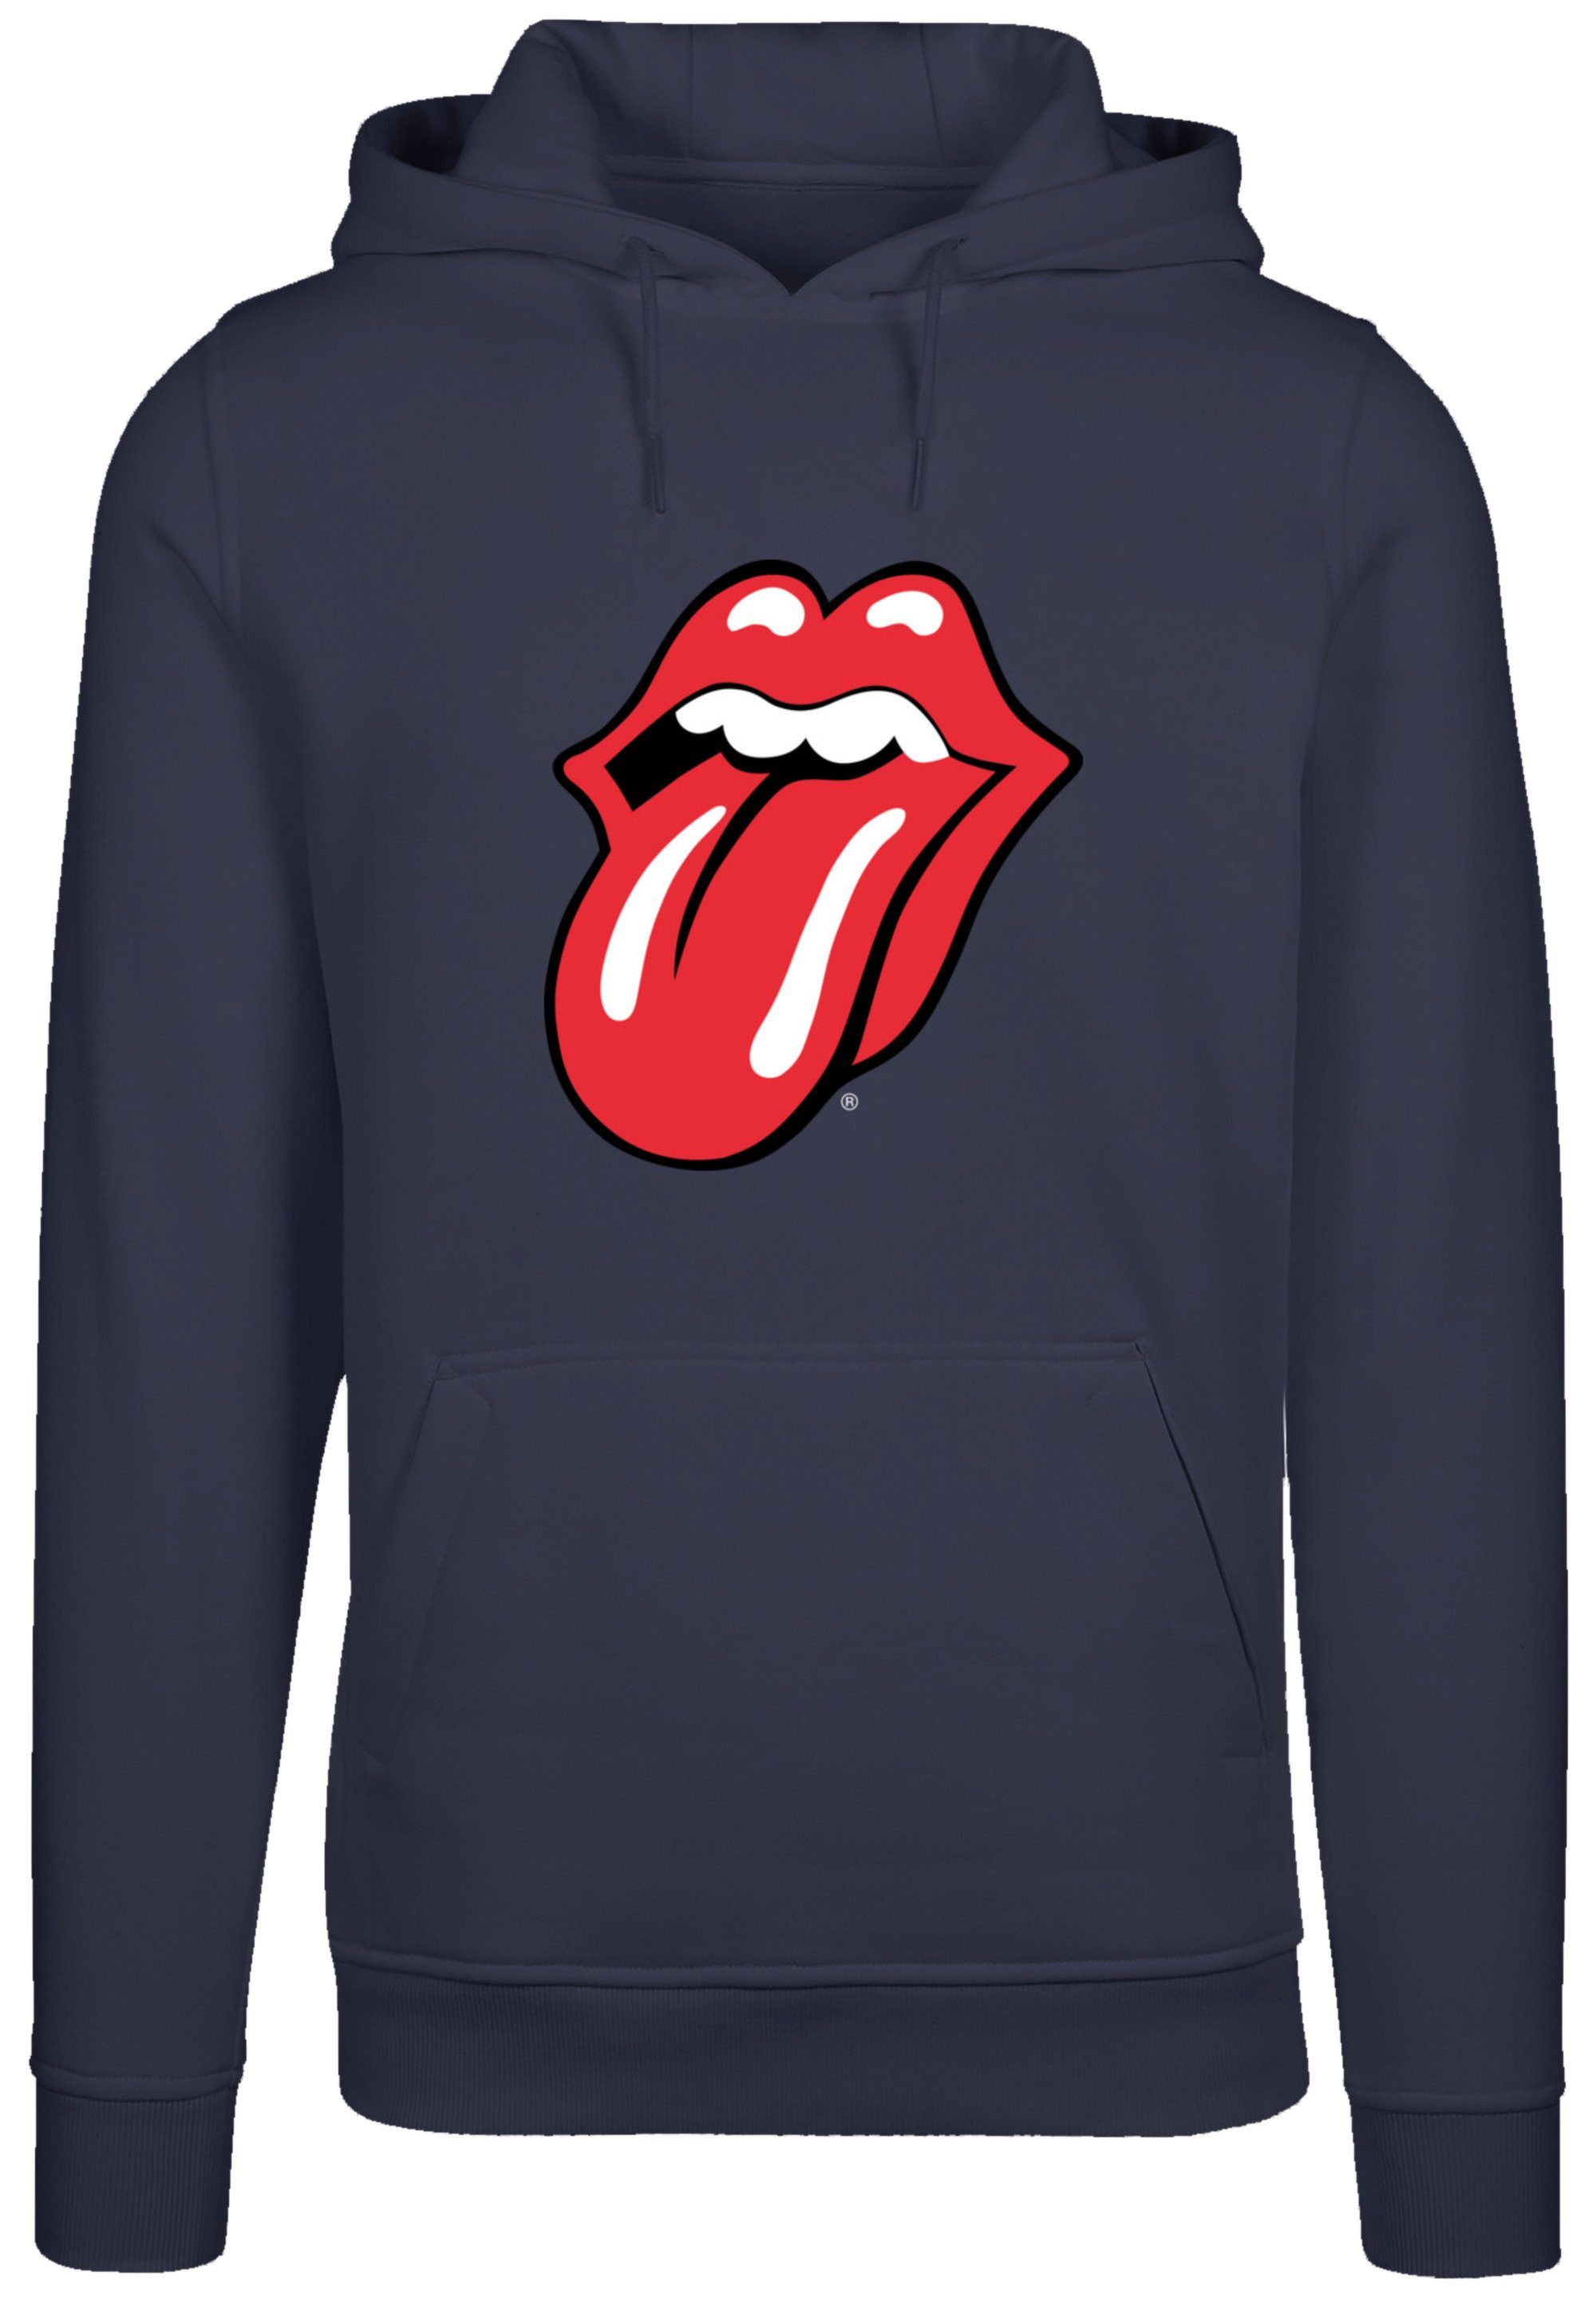 F4NT4STIC Kapuzenpullover The Rolling Stones Classic Zunge Rock Musik Band Hoodie, Warm, Bequem navy